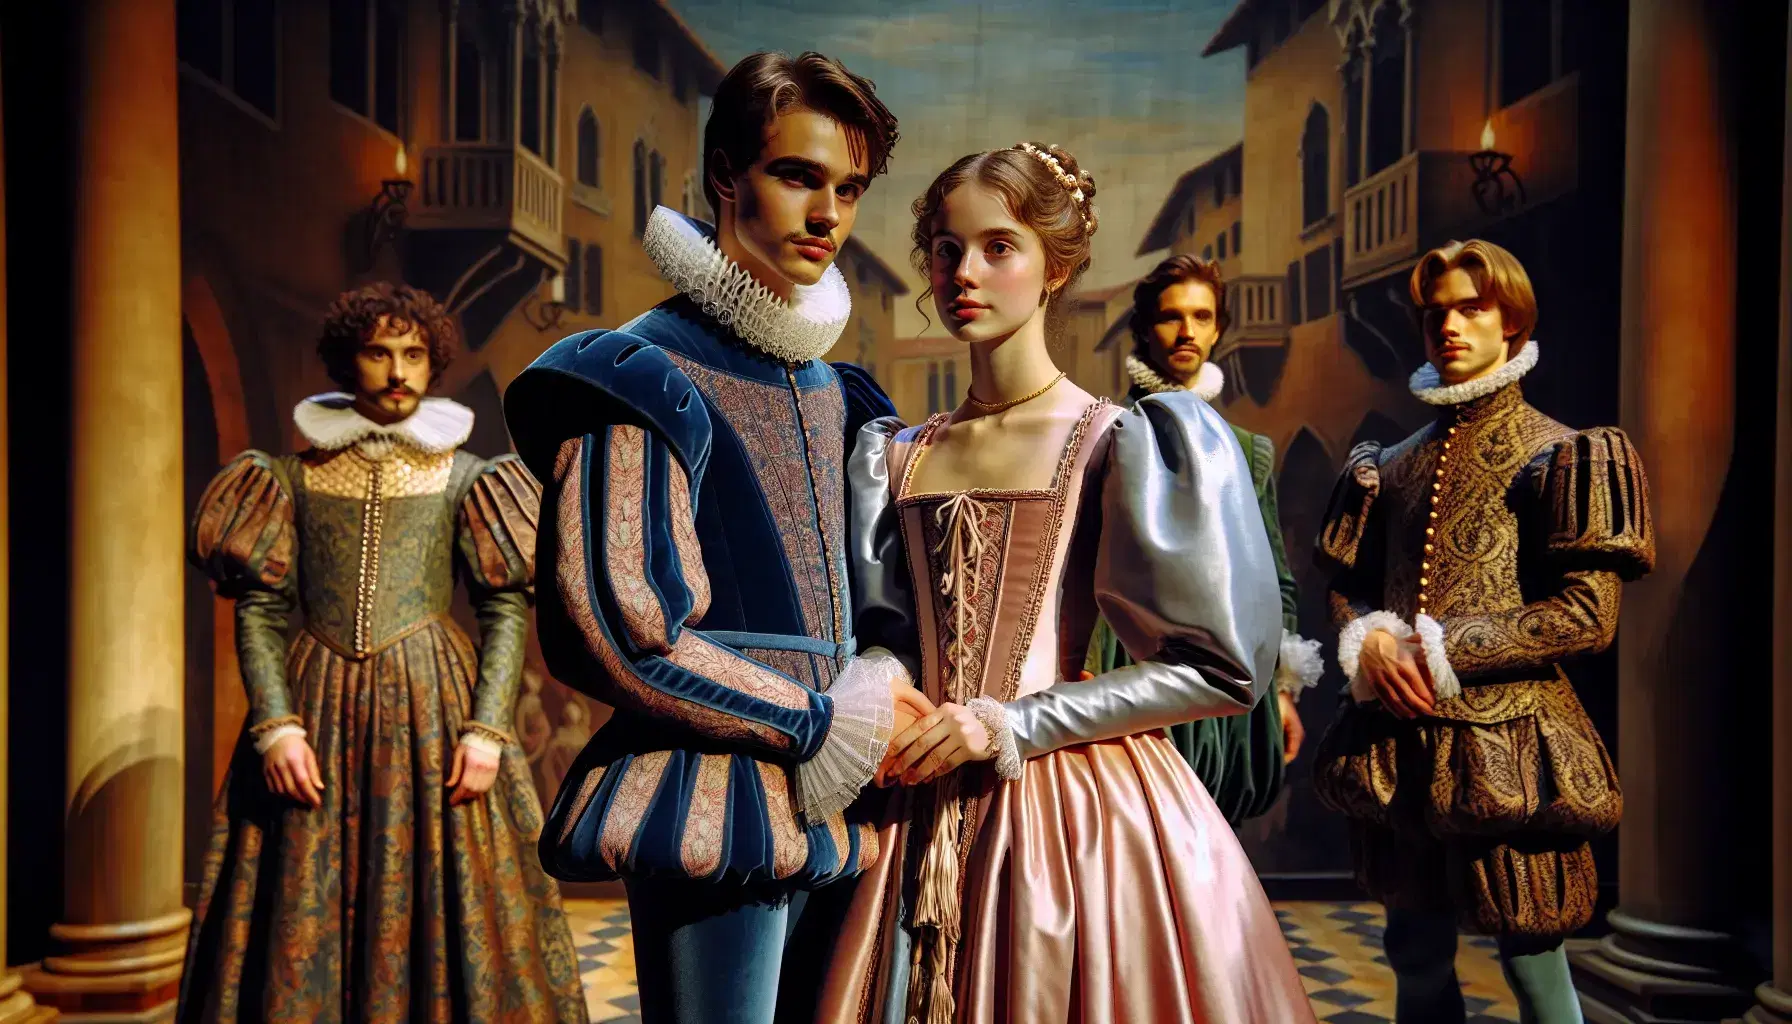 Elizabethan theatrical representation with Romeo in a blue double-breasted suit and Juliet in a pink satin dress, a painted Verona in the background.